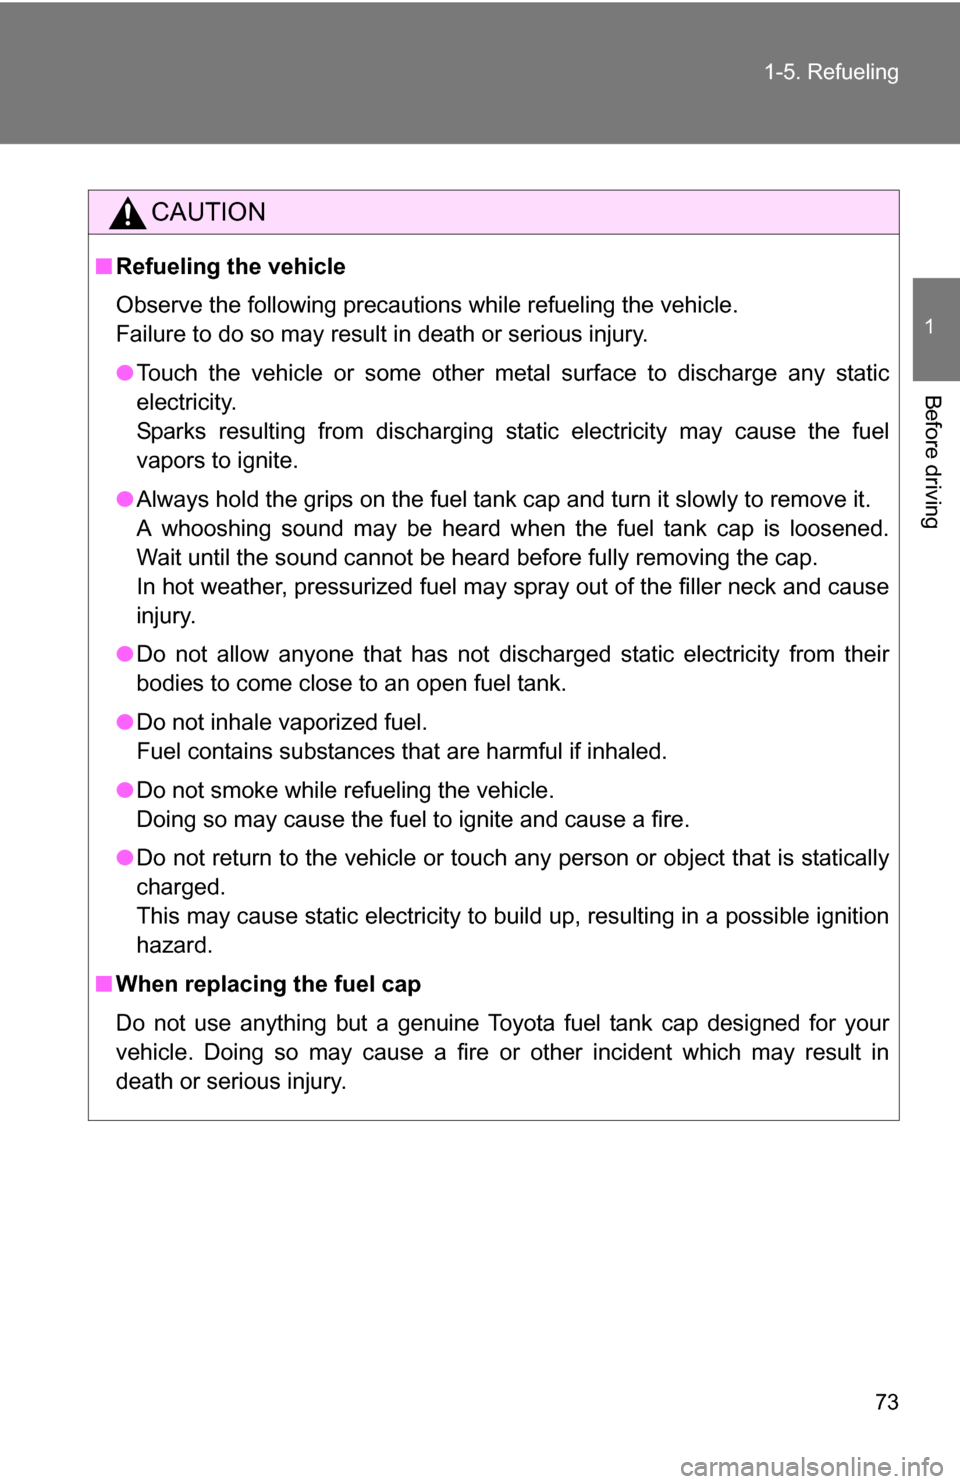 TOYOTA COROLLA 2009 10.G Owners Manual 73
1-5. Refueling
1
Before driving
CAUTION
■
Refueling the vehicle
Observe the following precautions while refueling the vehicle. 
Failure to do so may result in death or serious injury.
●Touch th